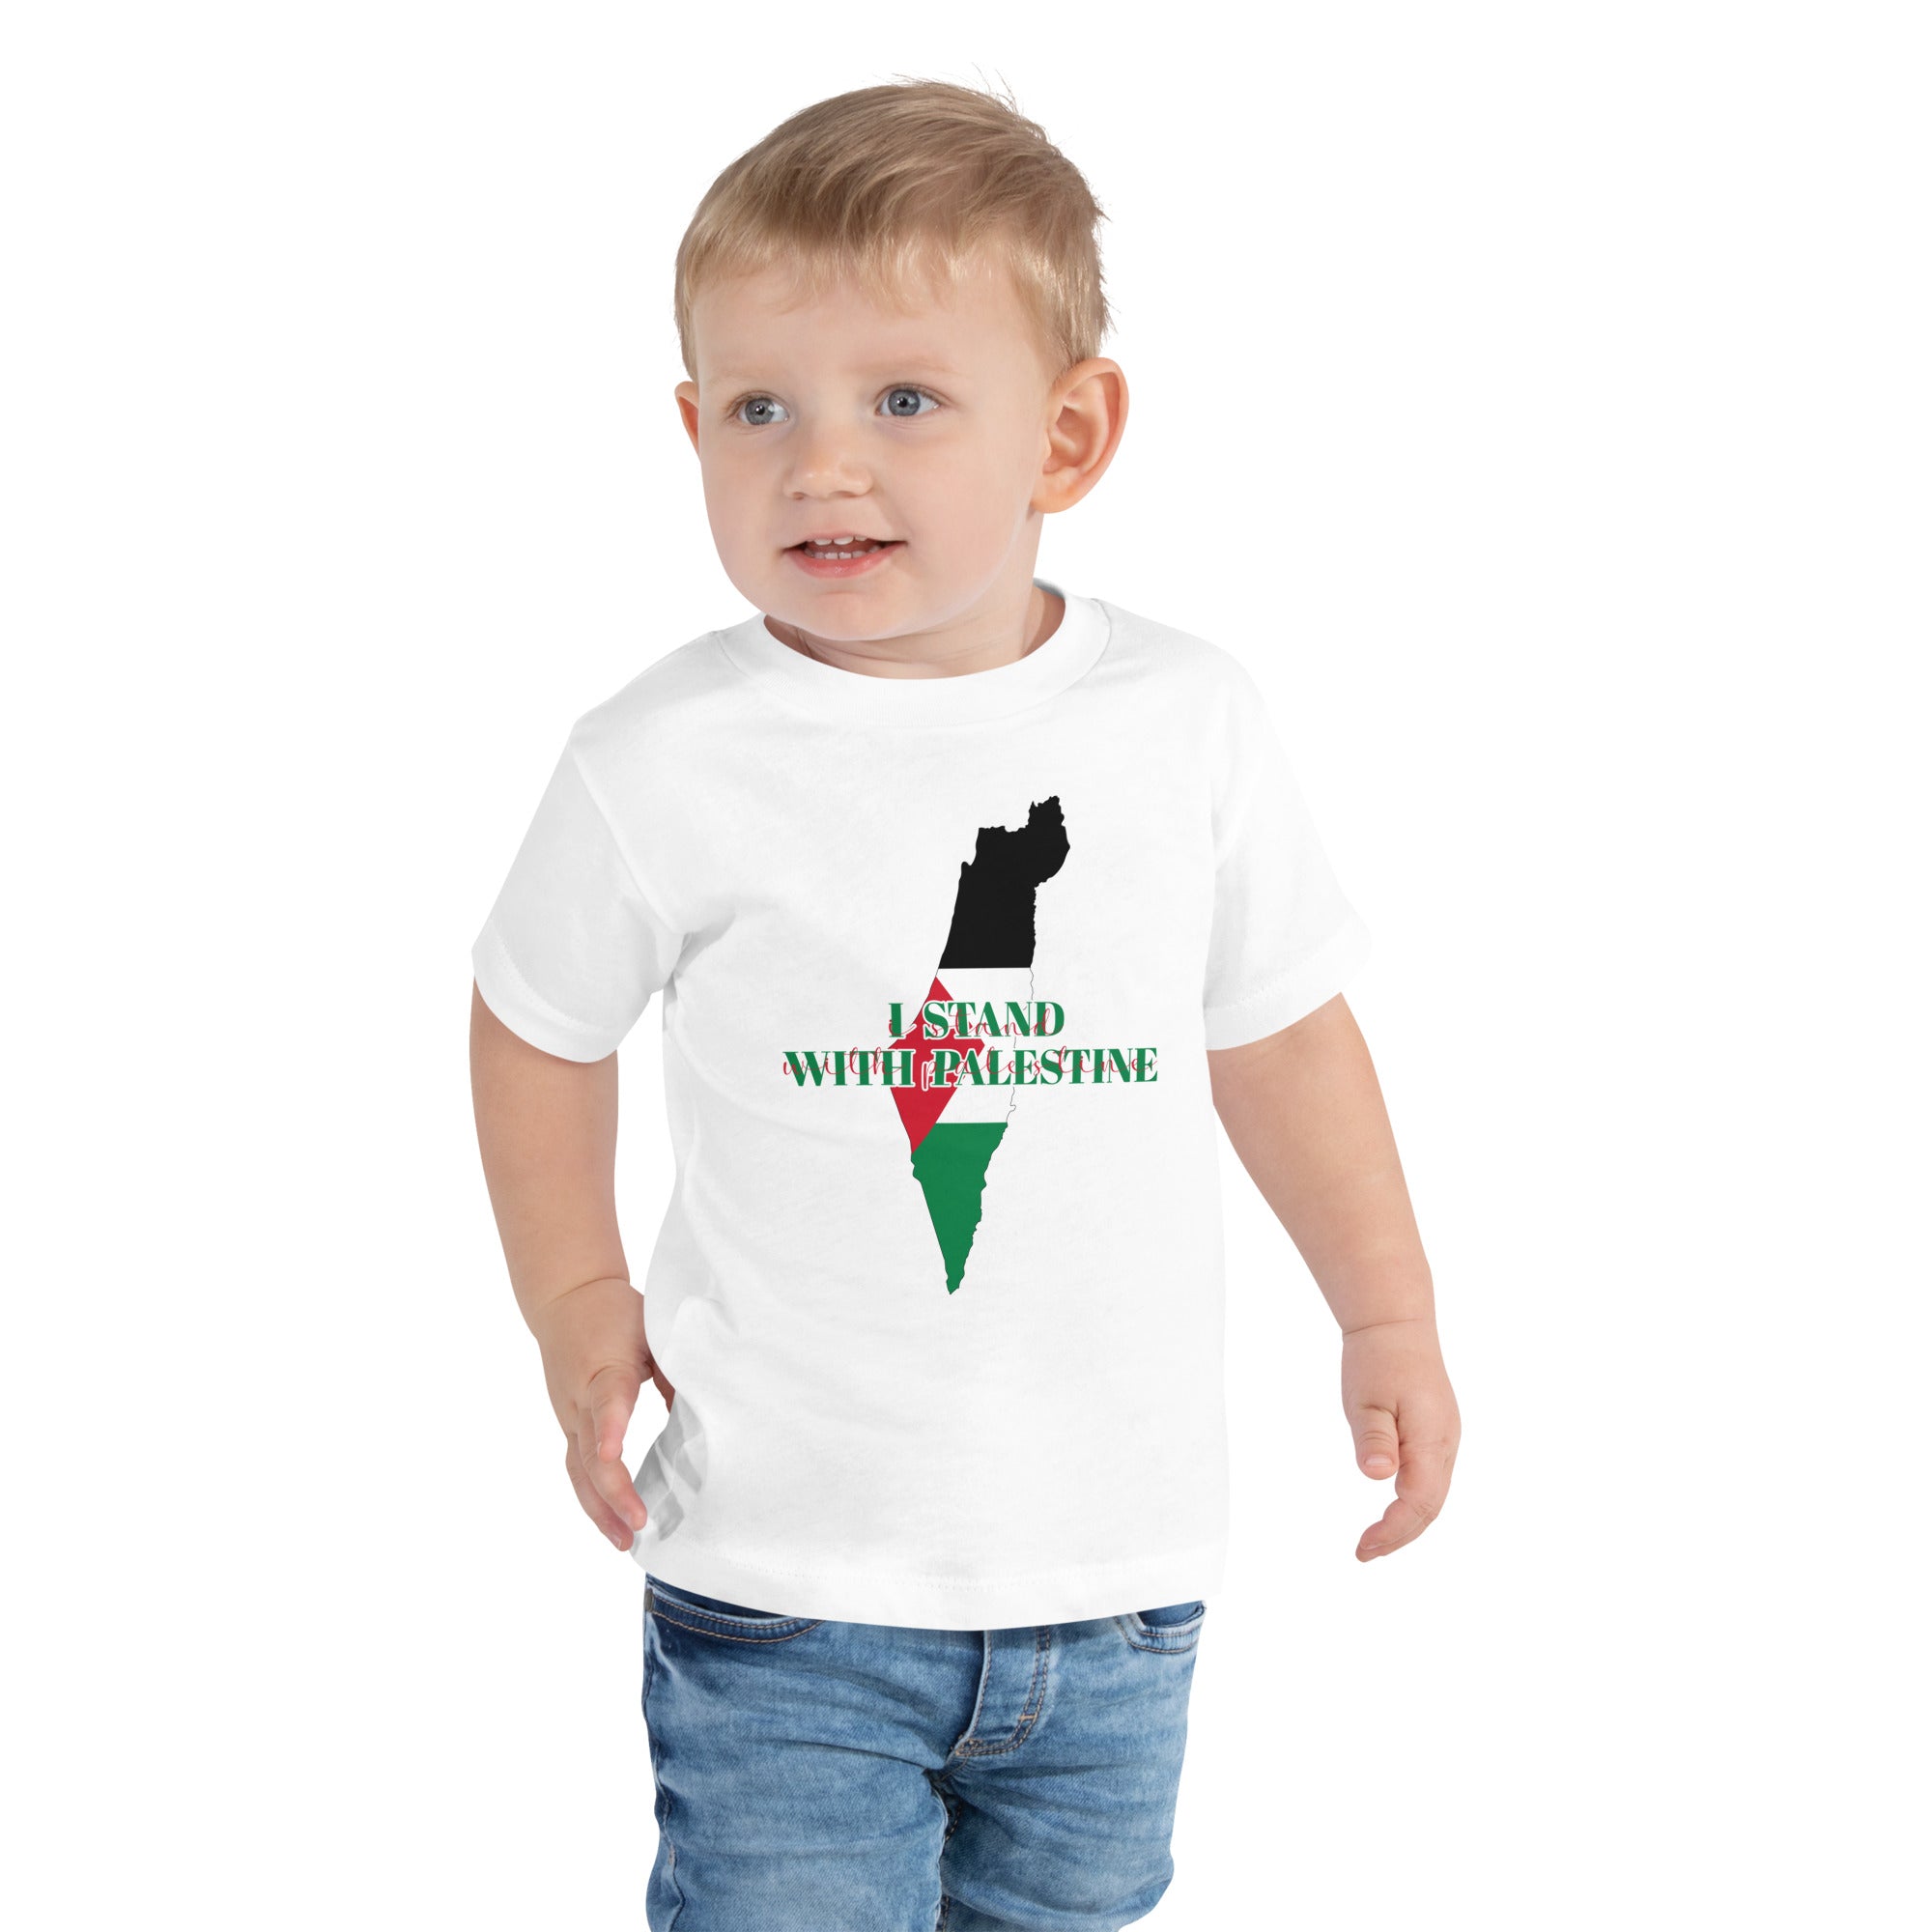 I Stand With Palestine Kids T-Shirt Palestine Map End Israeli Occupation Support Palestine Freedom Ghaza Protest Kids T-Shirt